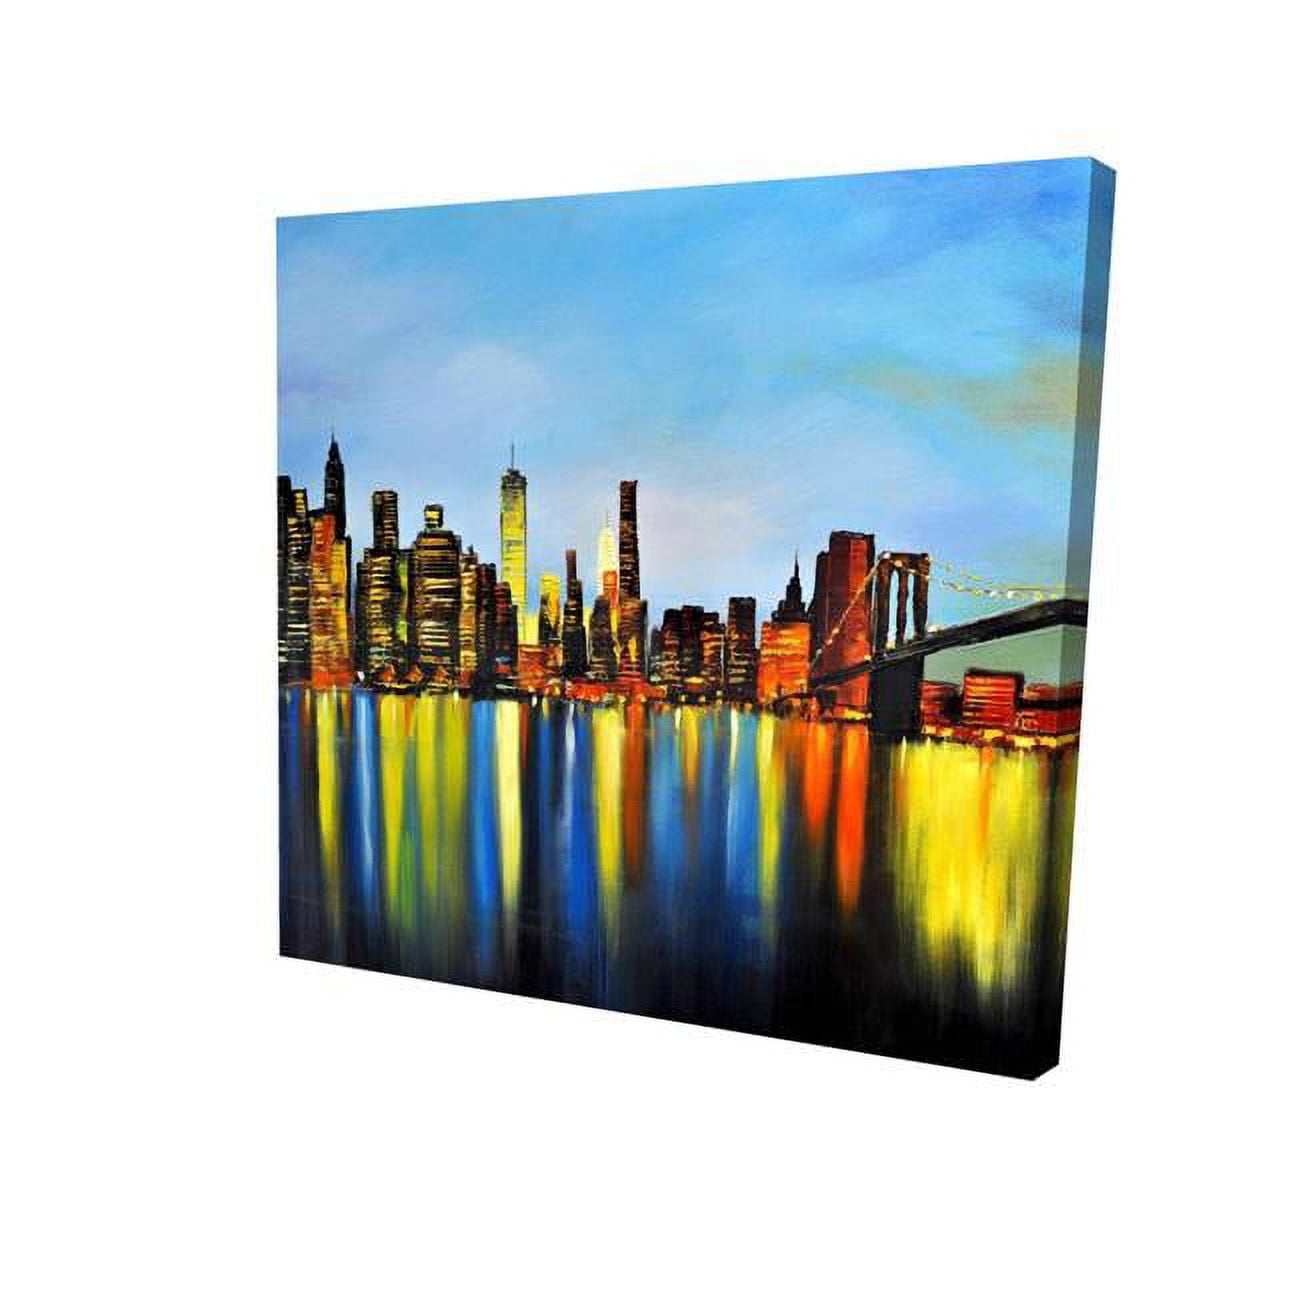 Begin Home Decor 2080-1616-CI66 16 x 16 in. City by Night with A Bridge-Print on Canvas